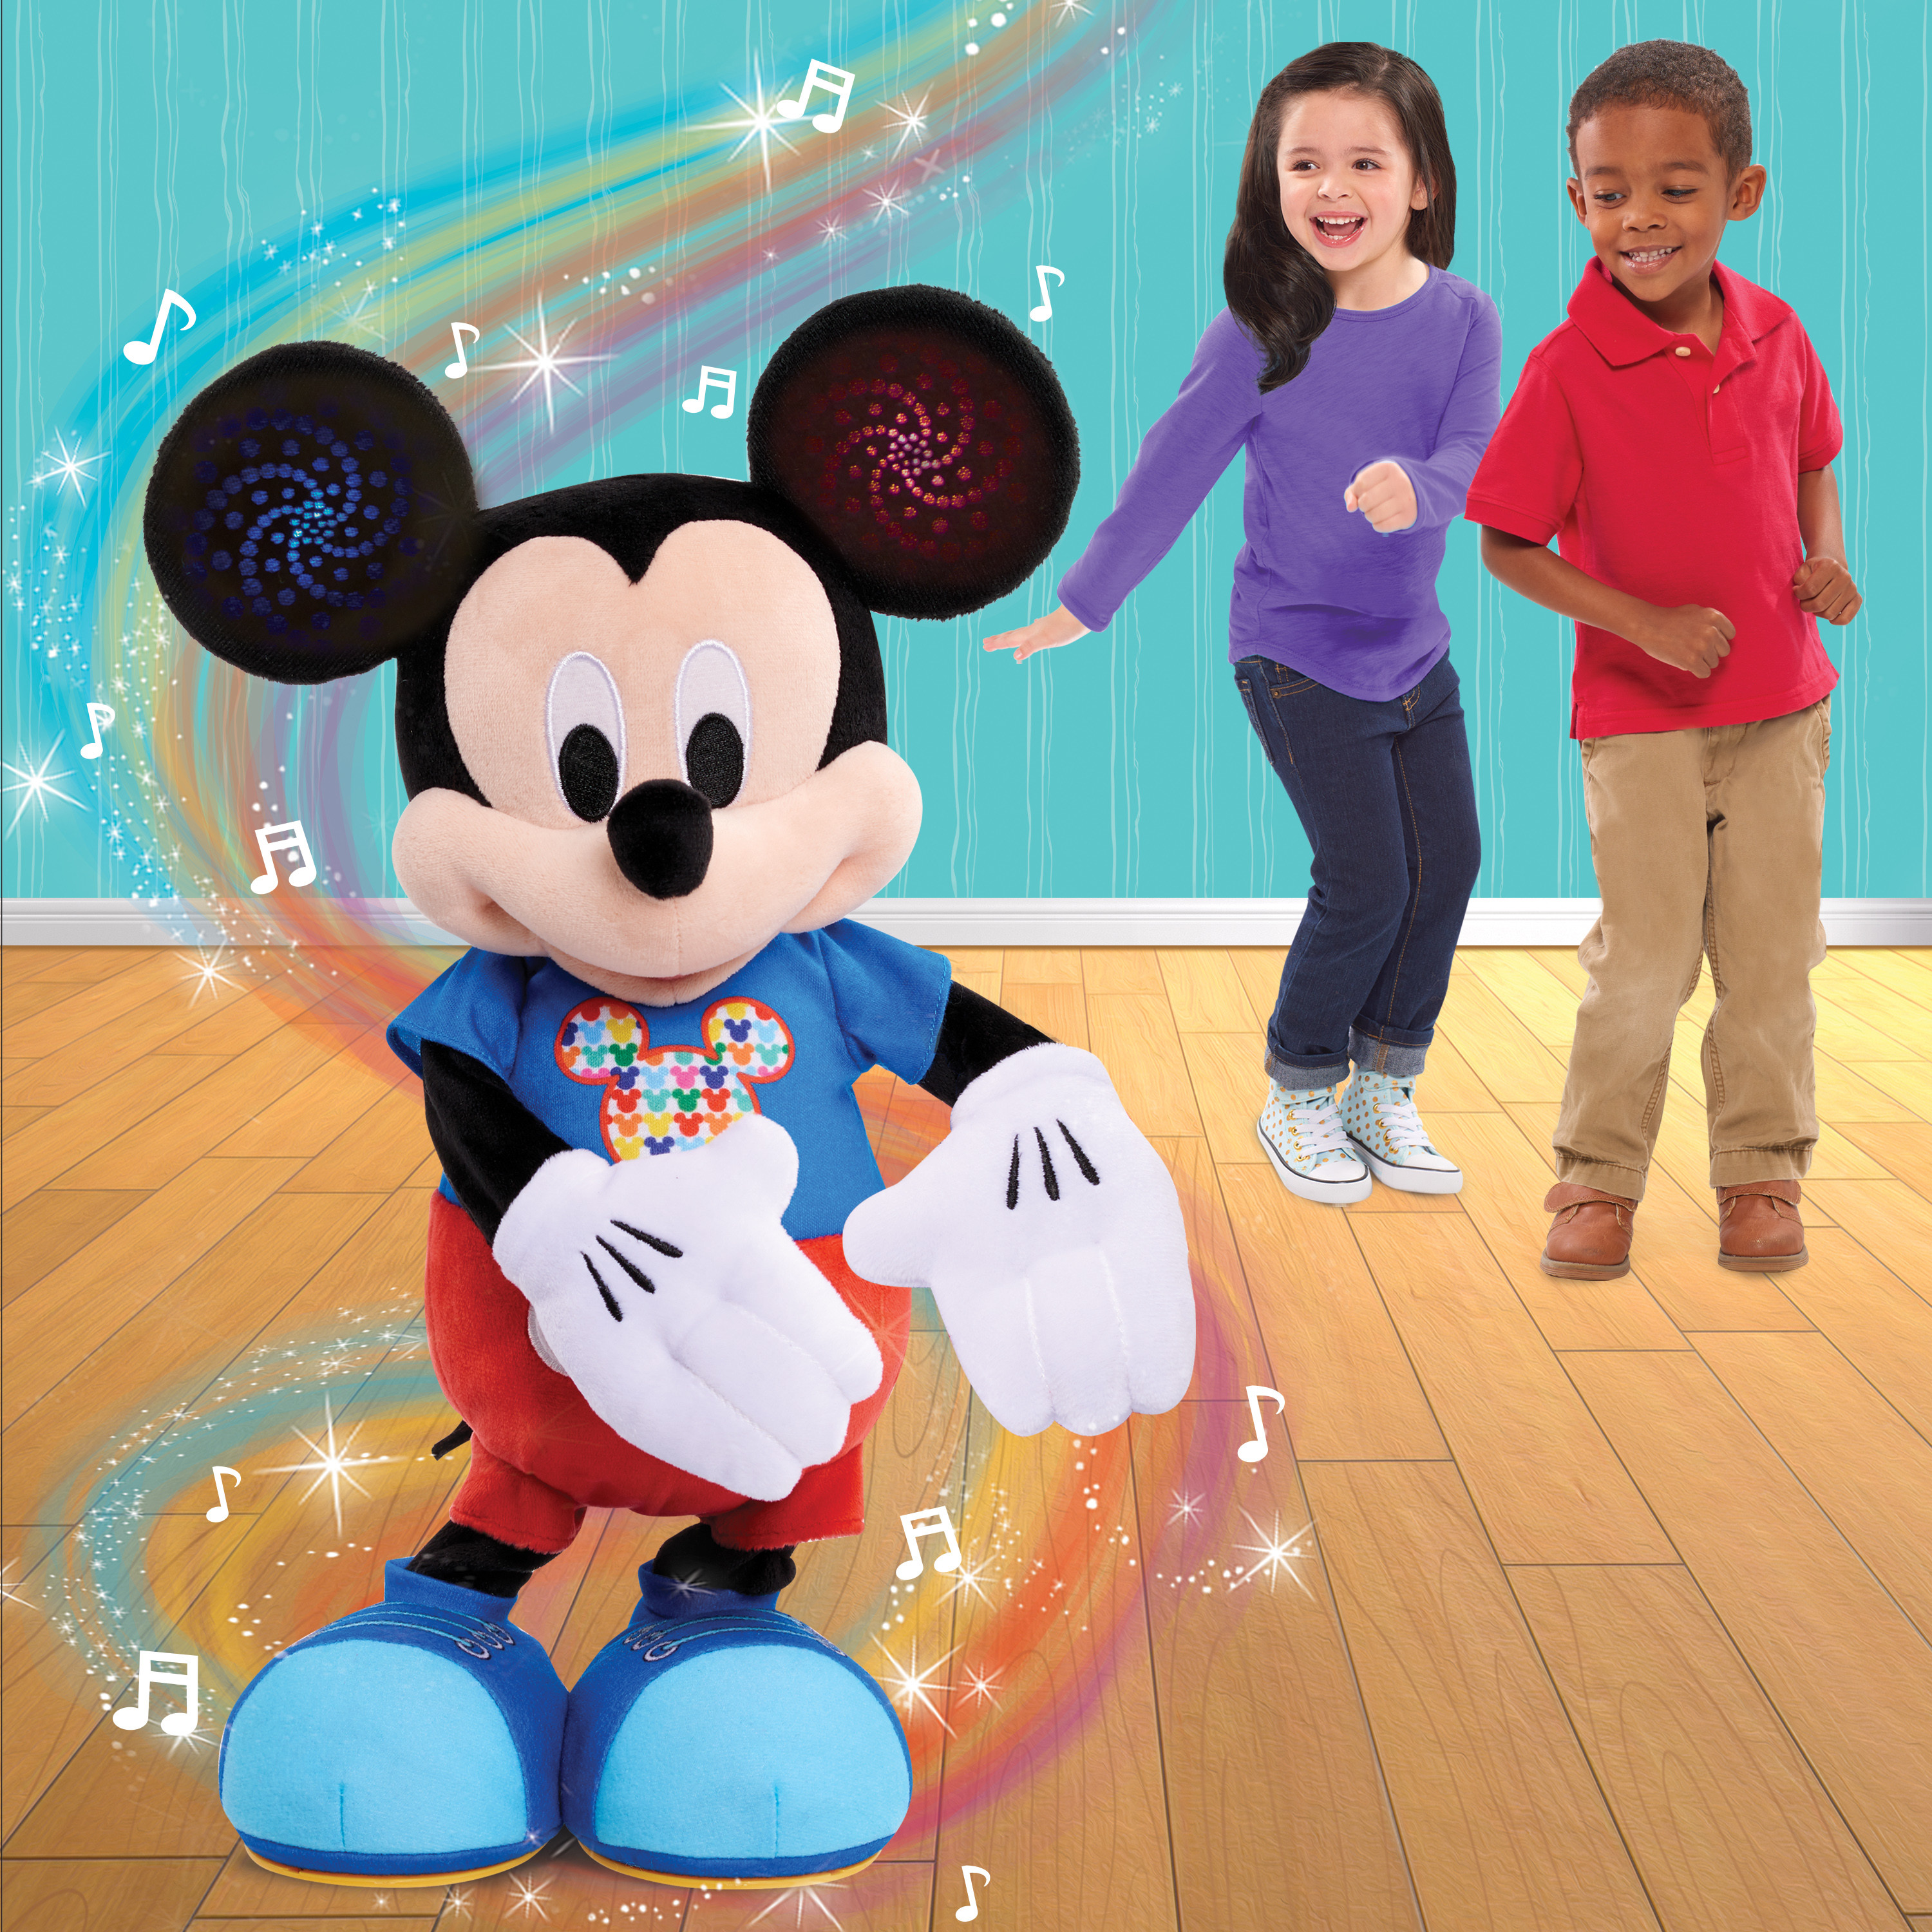 Disney Junior Hot Dog Dance Break Mickey Mouse, Interactive Plush Toy, Lights Up and Sings "Hot Dog Song" and Plays “Color Detective” Game, Kids Toys for Ages 3 up - image 3 of 4